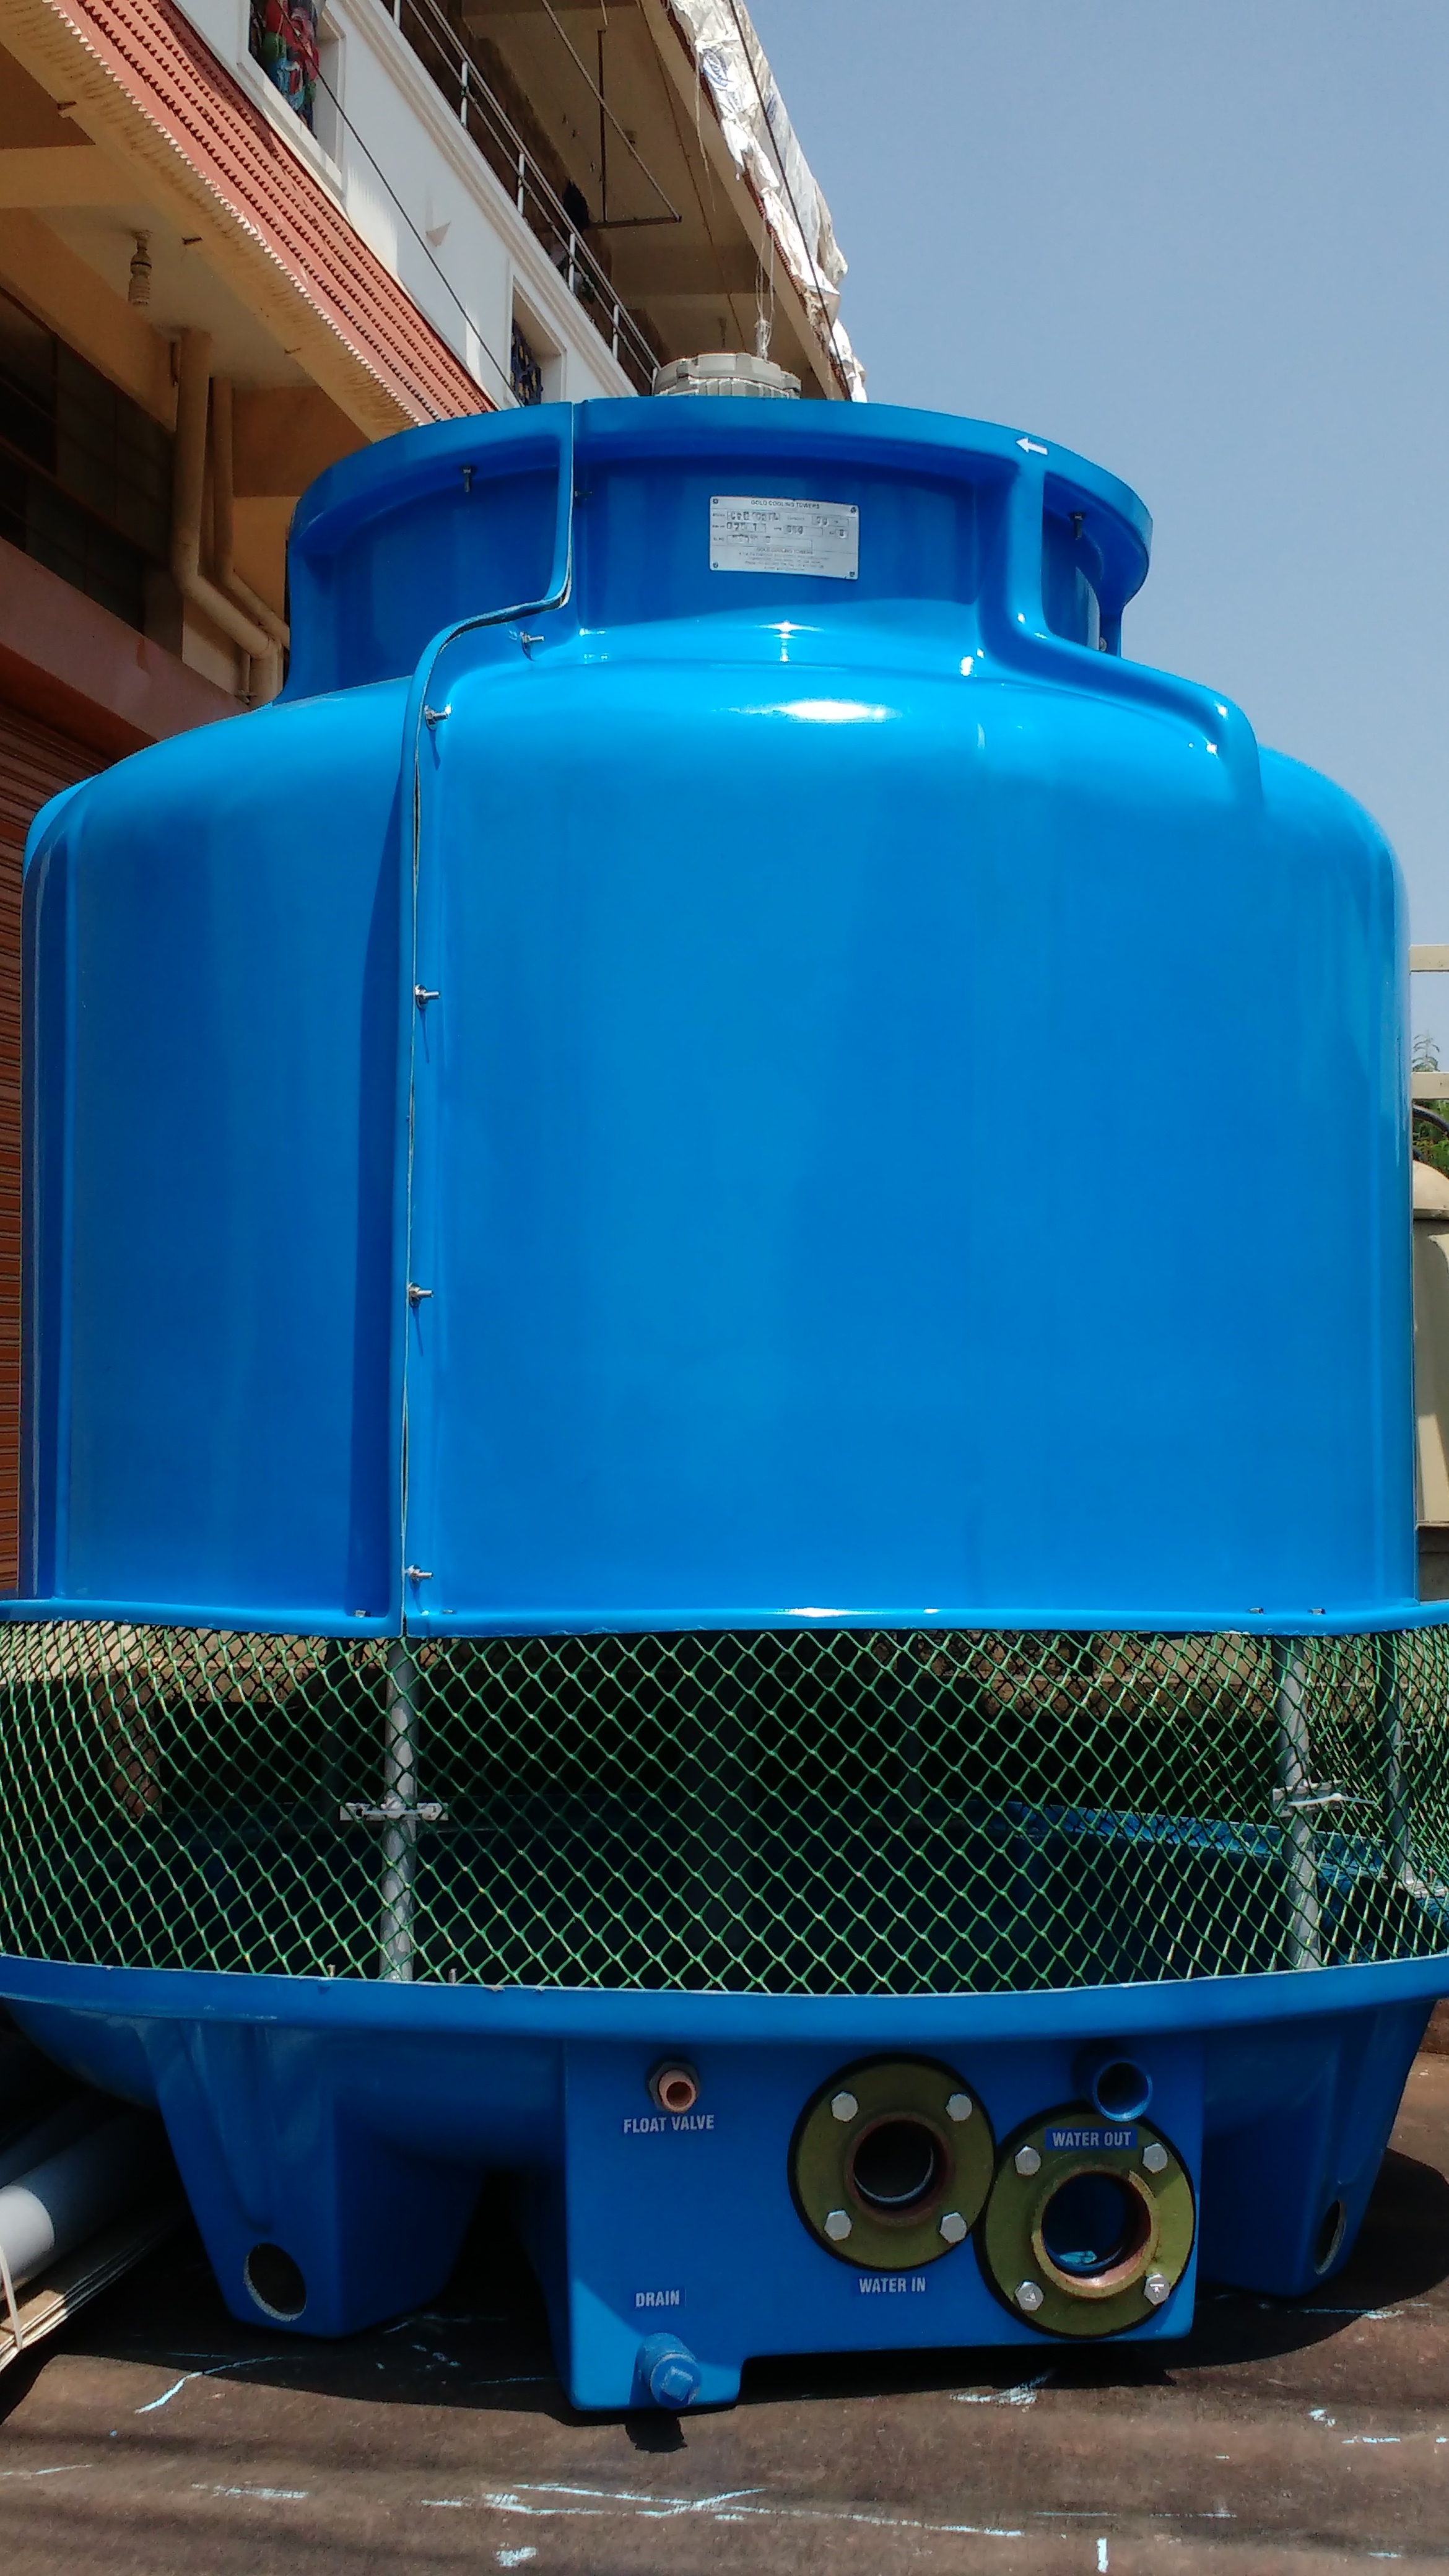 FRP Round Cooling Tower